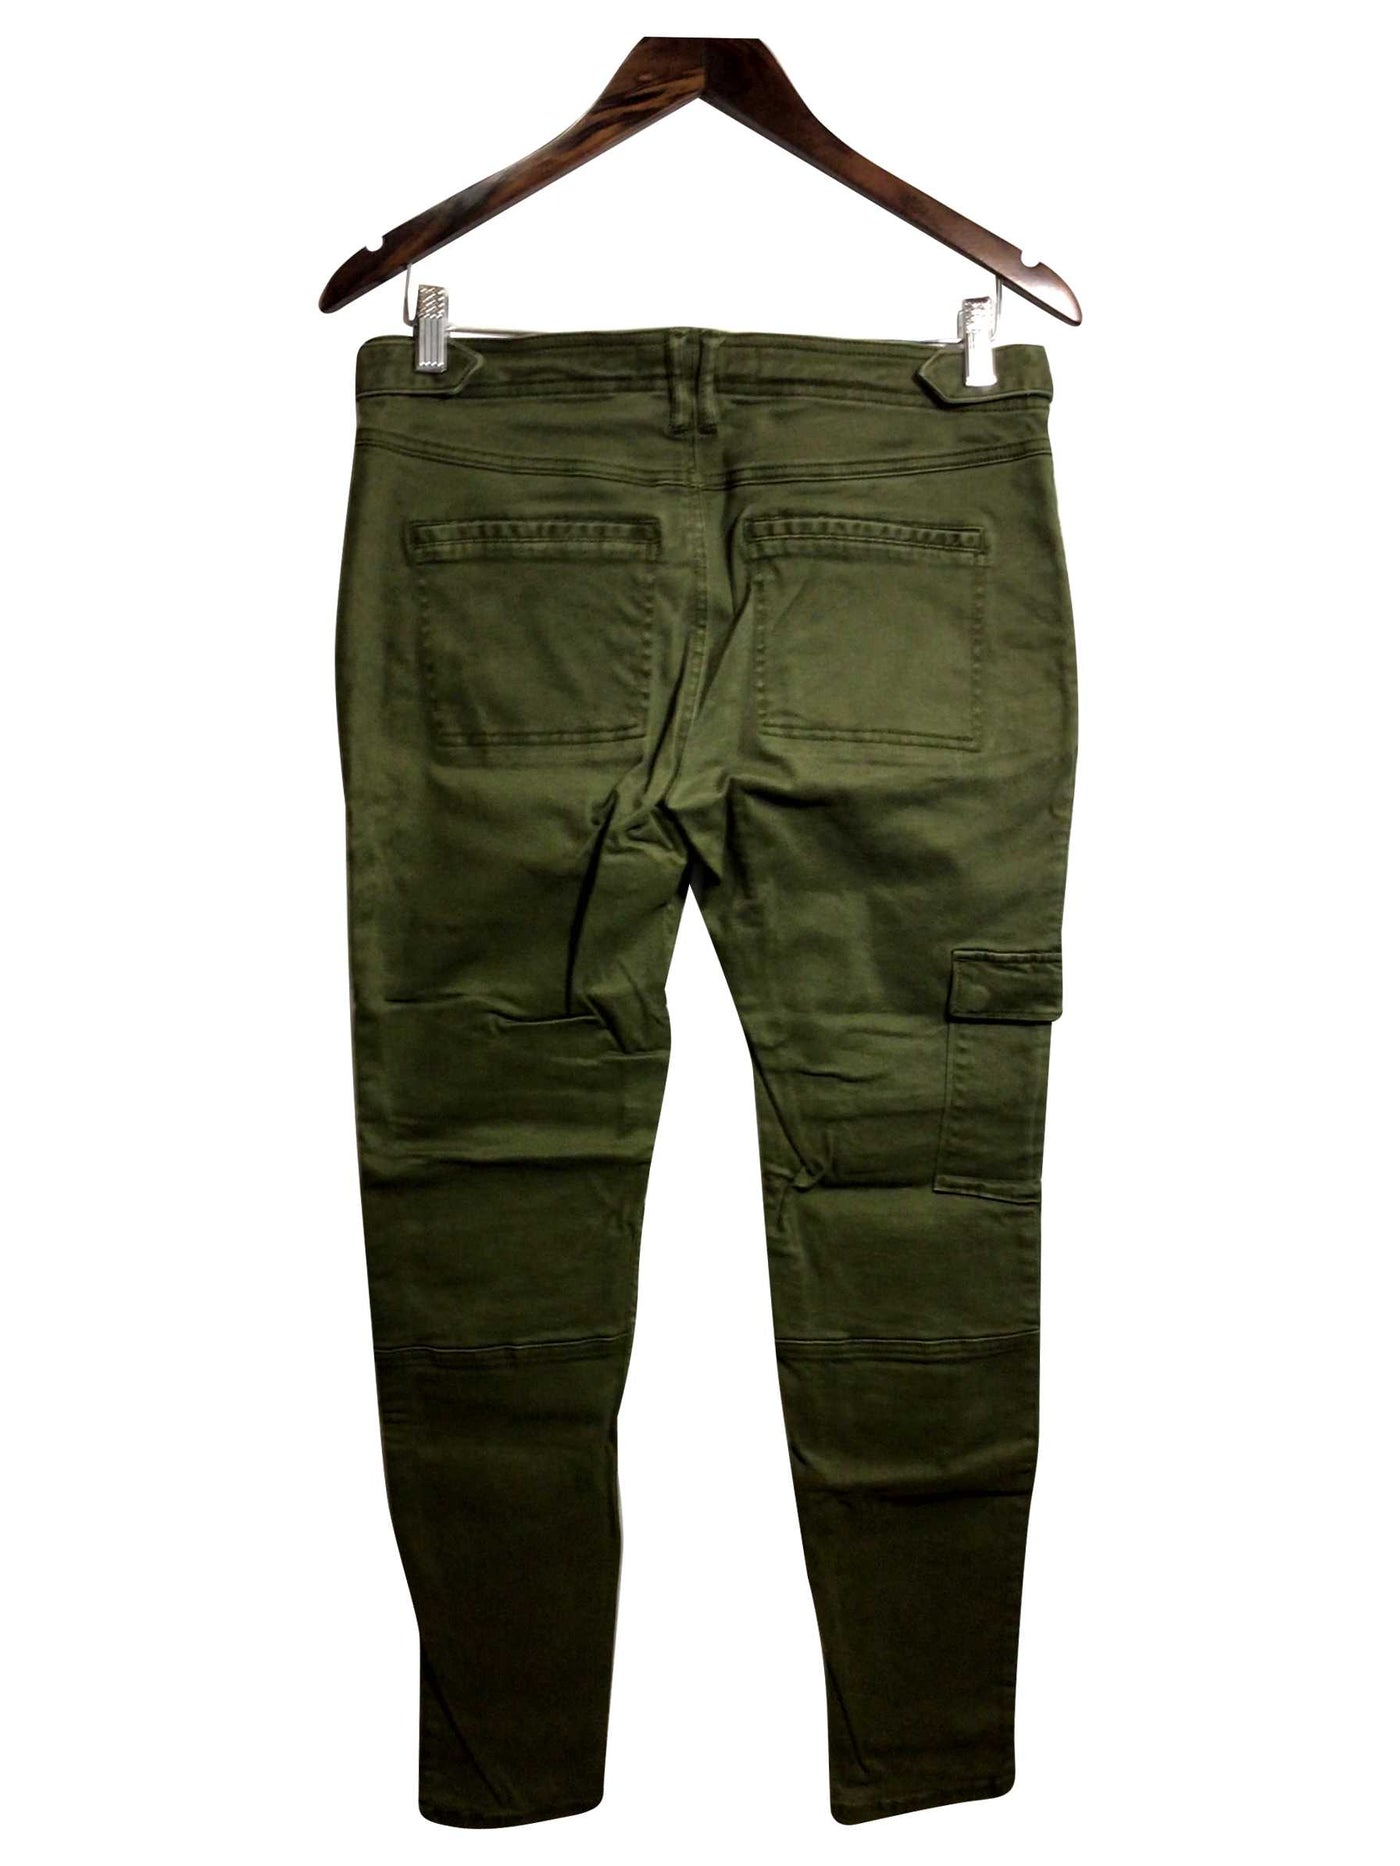 ABERCROMBIE & FITCH Regular fit Pant in Green - Size 29x29 | 13 $ KOOP